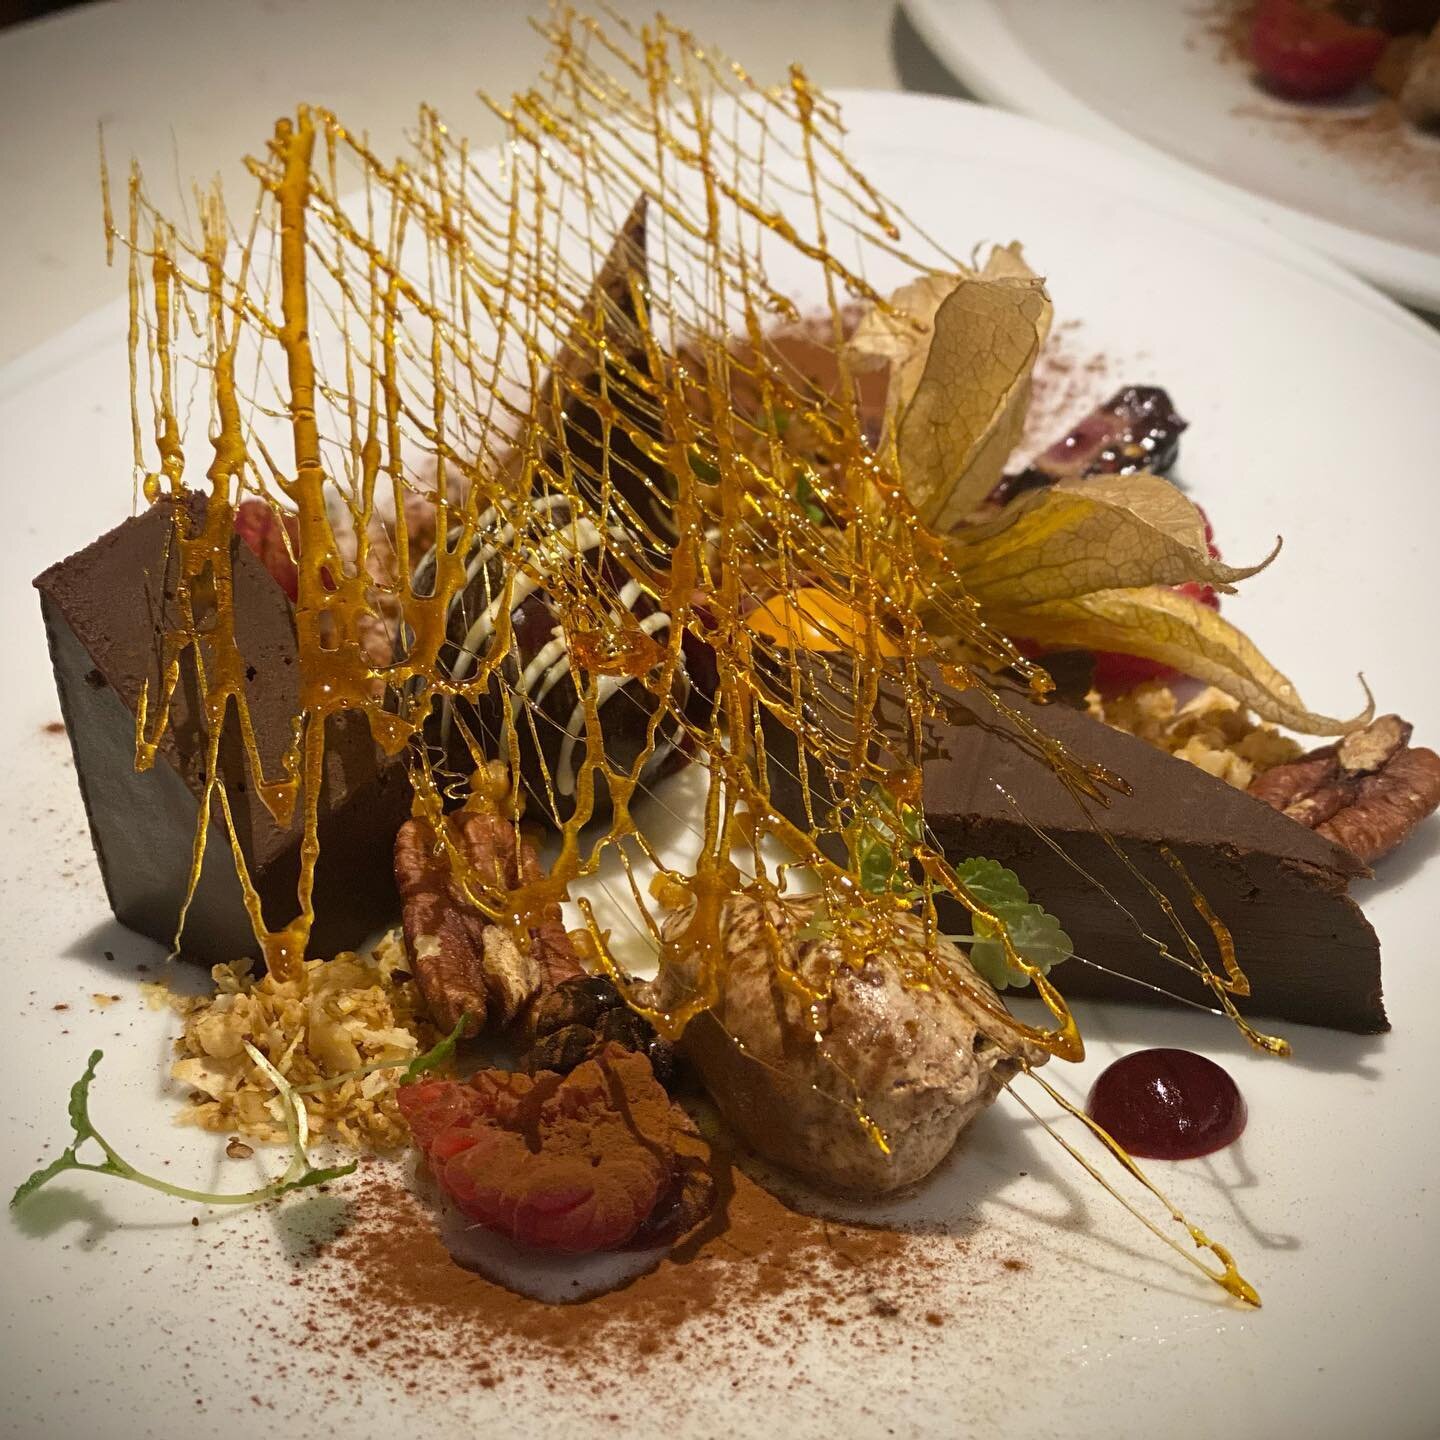 Penultimate course on our tasting menu - #Chocolate #privatechef #gourmetcatering #hampshirechef #dinnerparty #specialocassion #dorsetchef #dinnerparty #delivery #gourmetdining #homechef